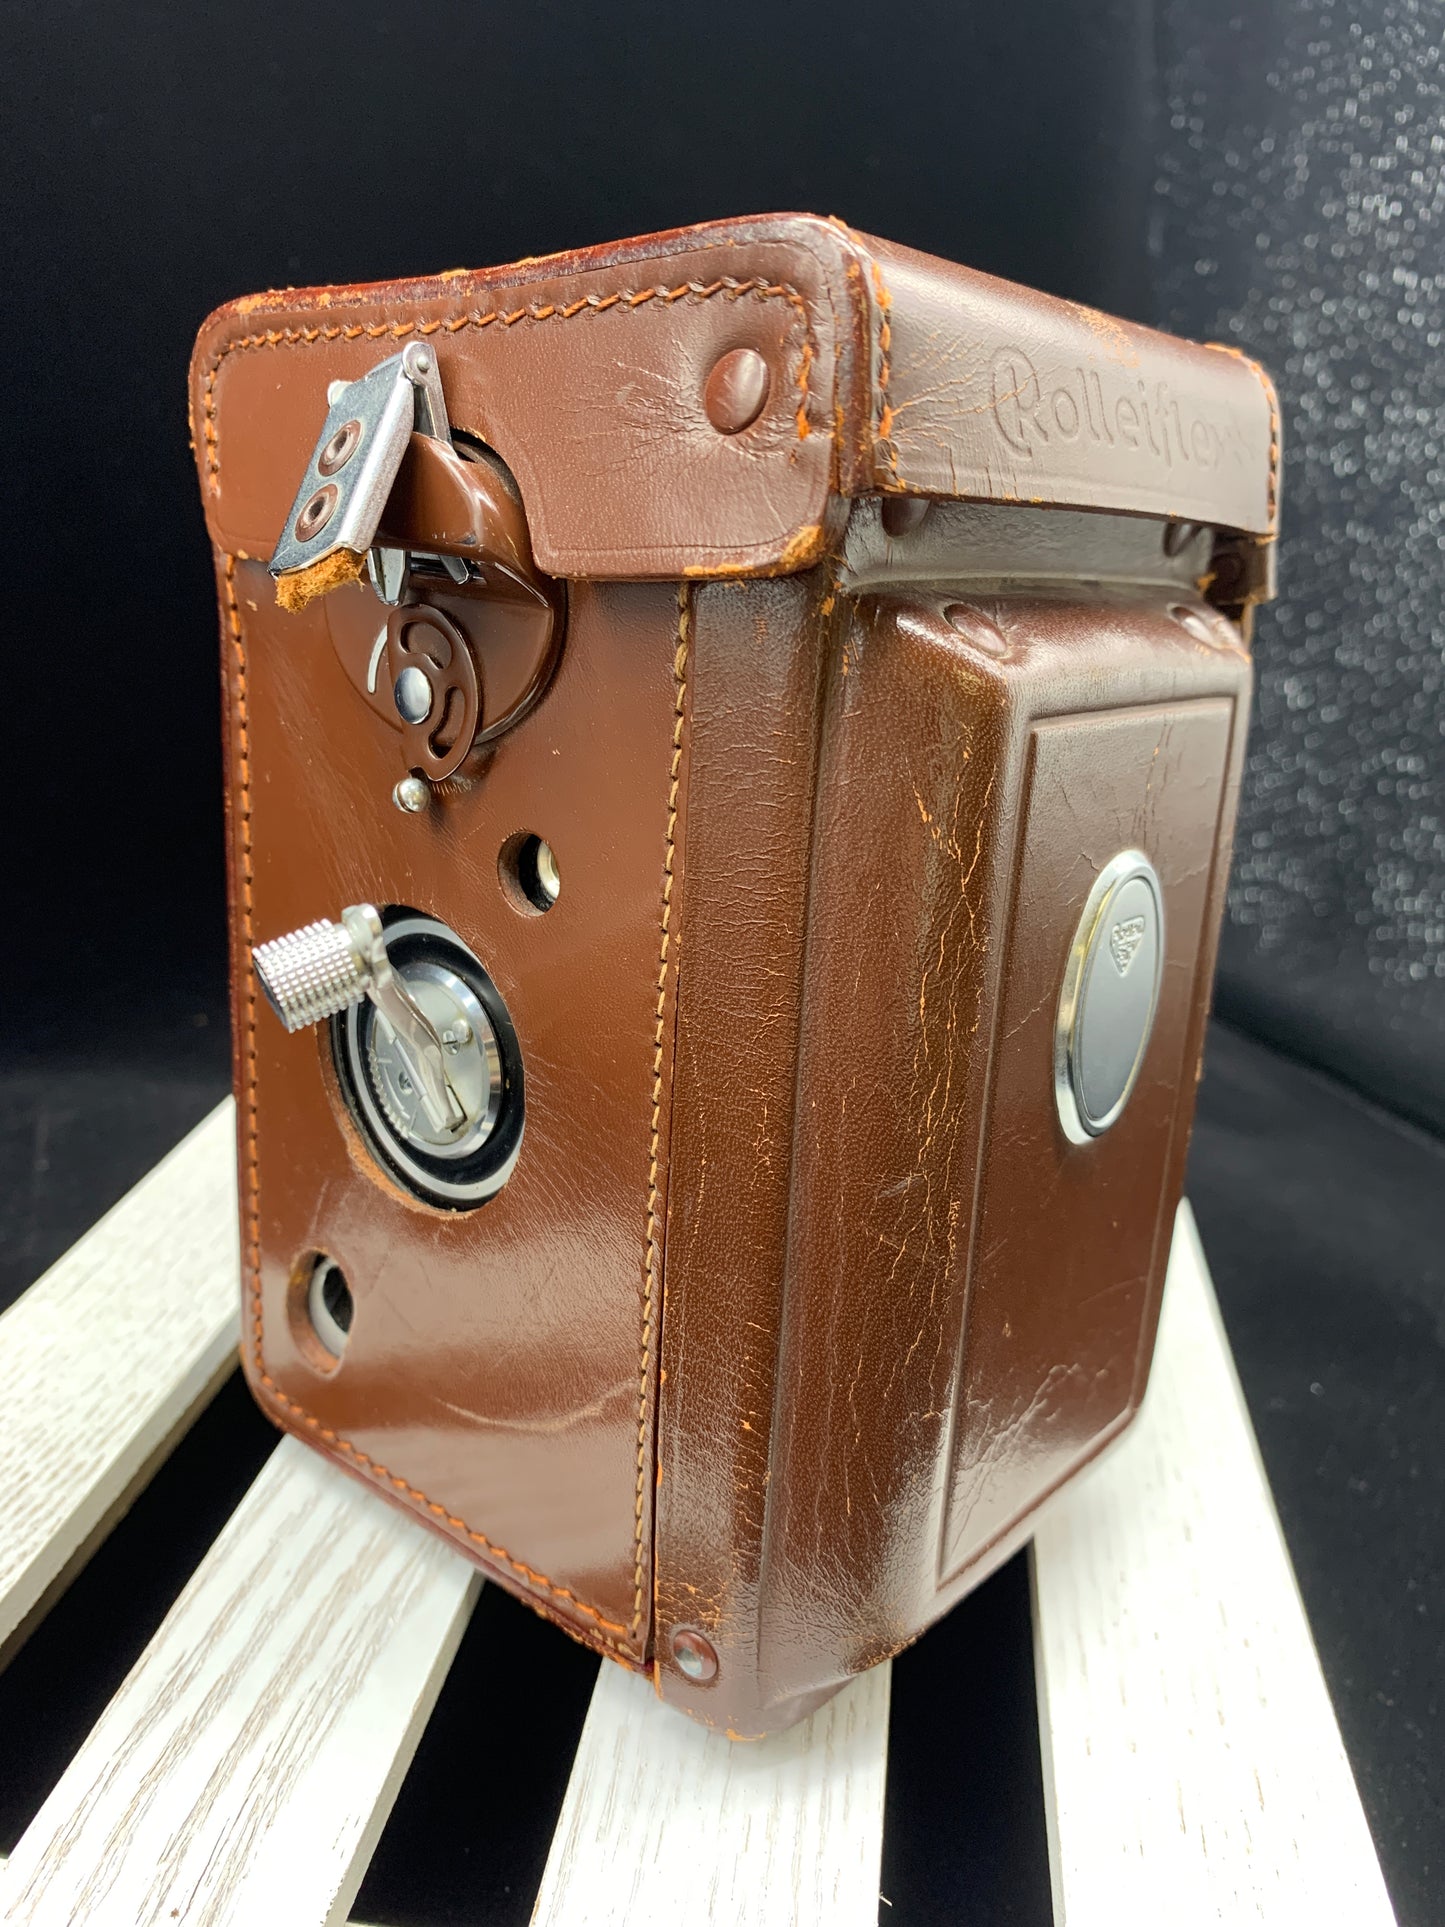 Rolleiflex Model 3.5 F Camera with Leather Case